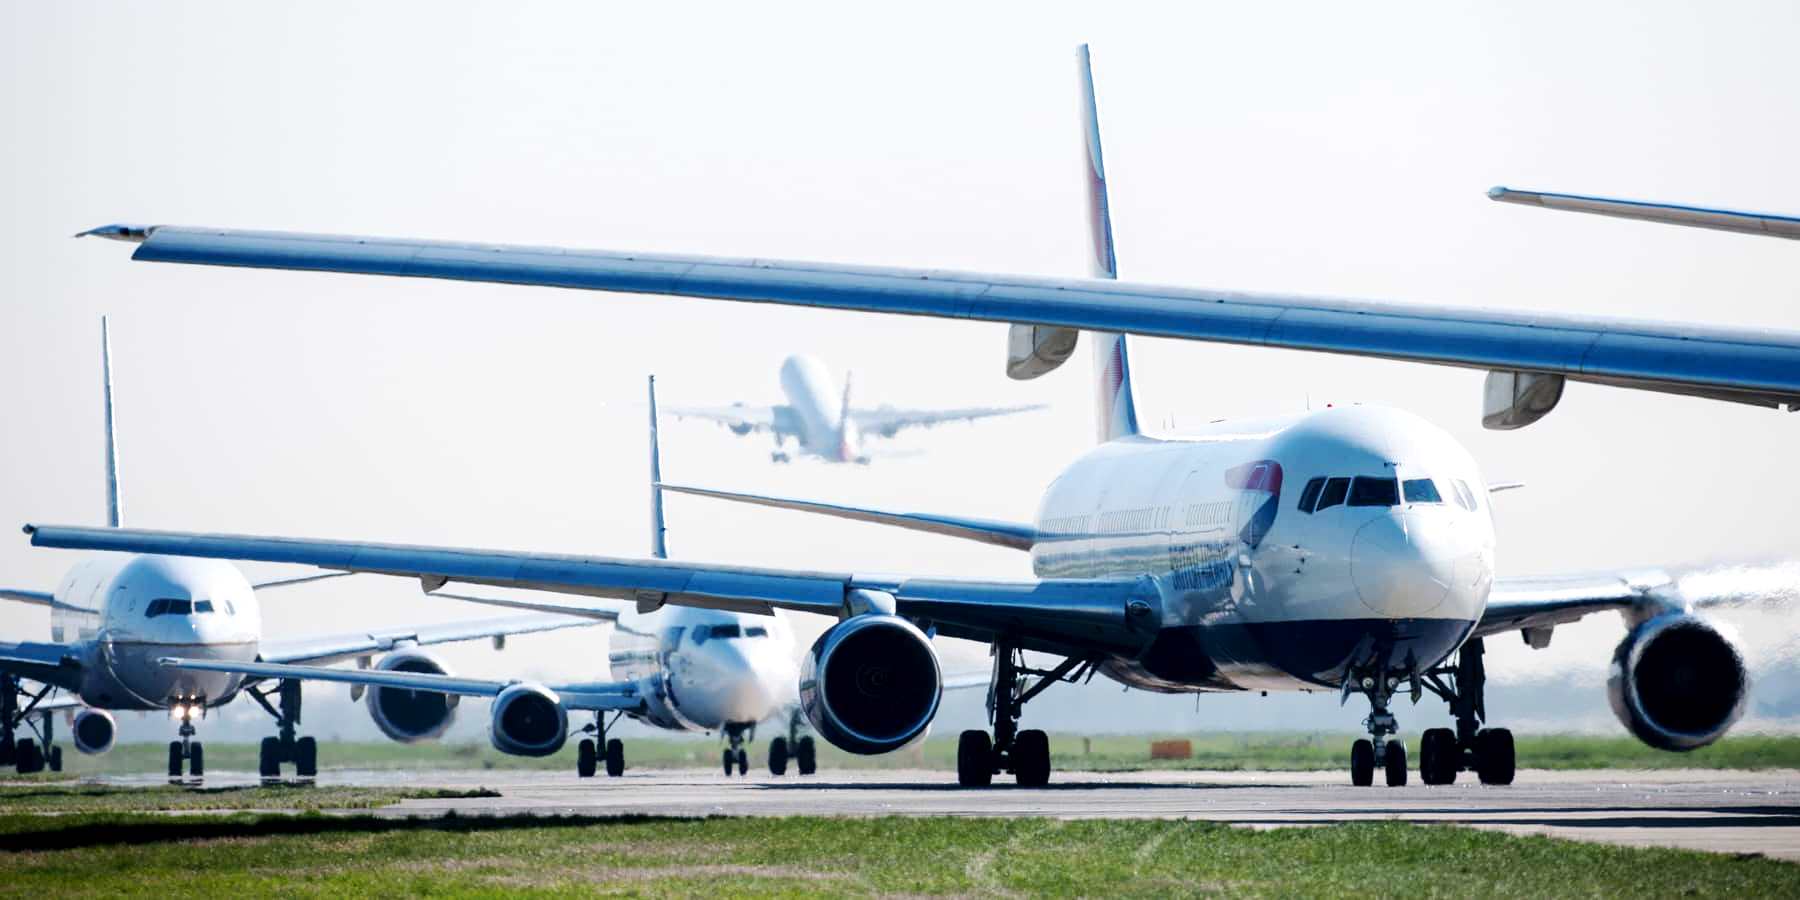 New tech to allow Heathrow to prioritise emission targets